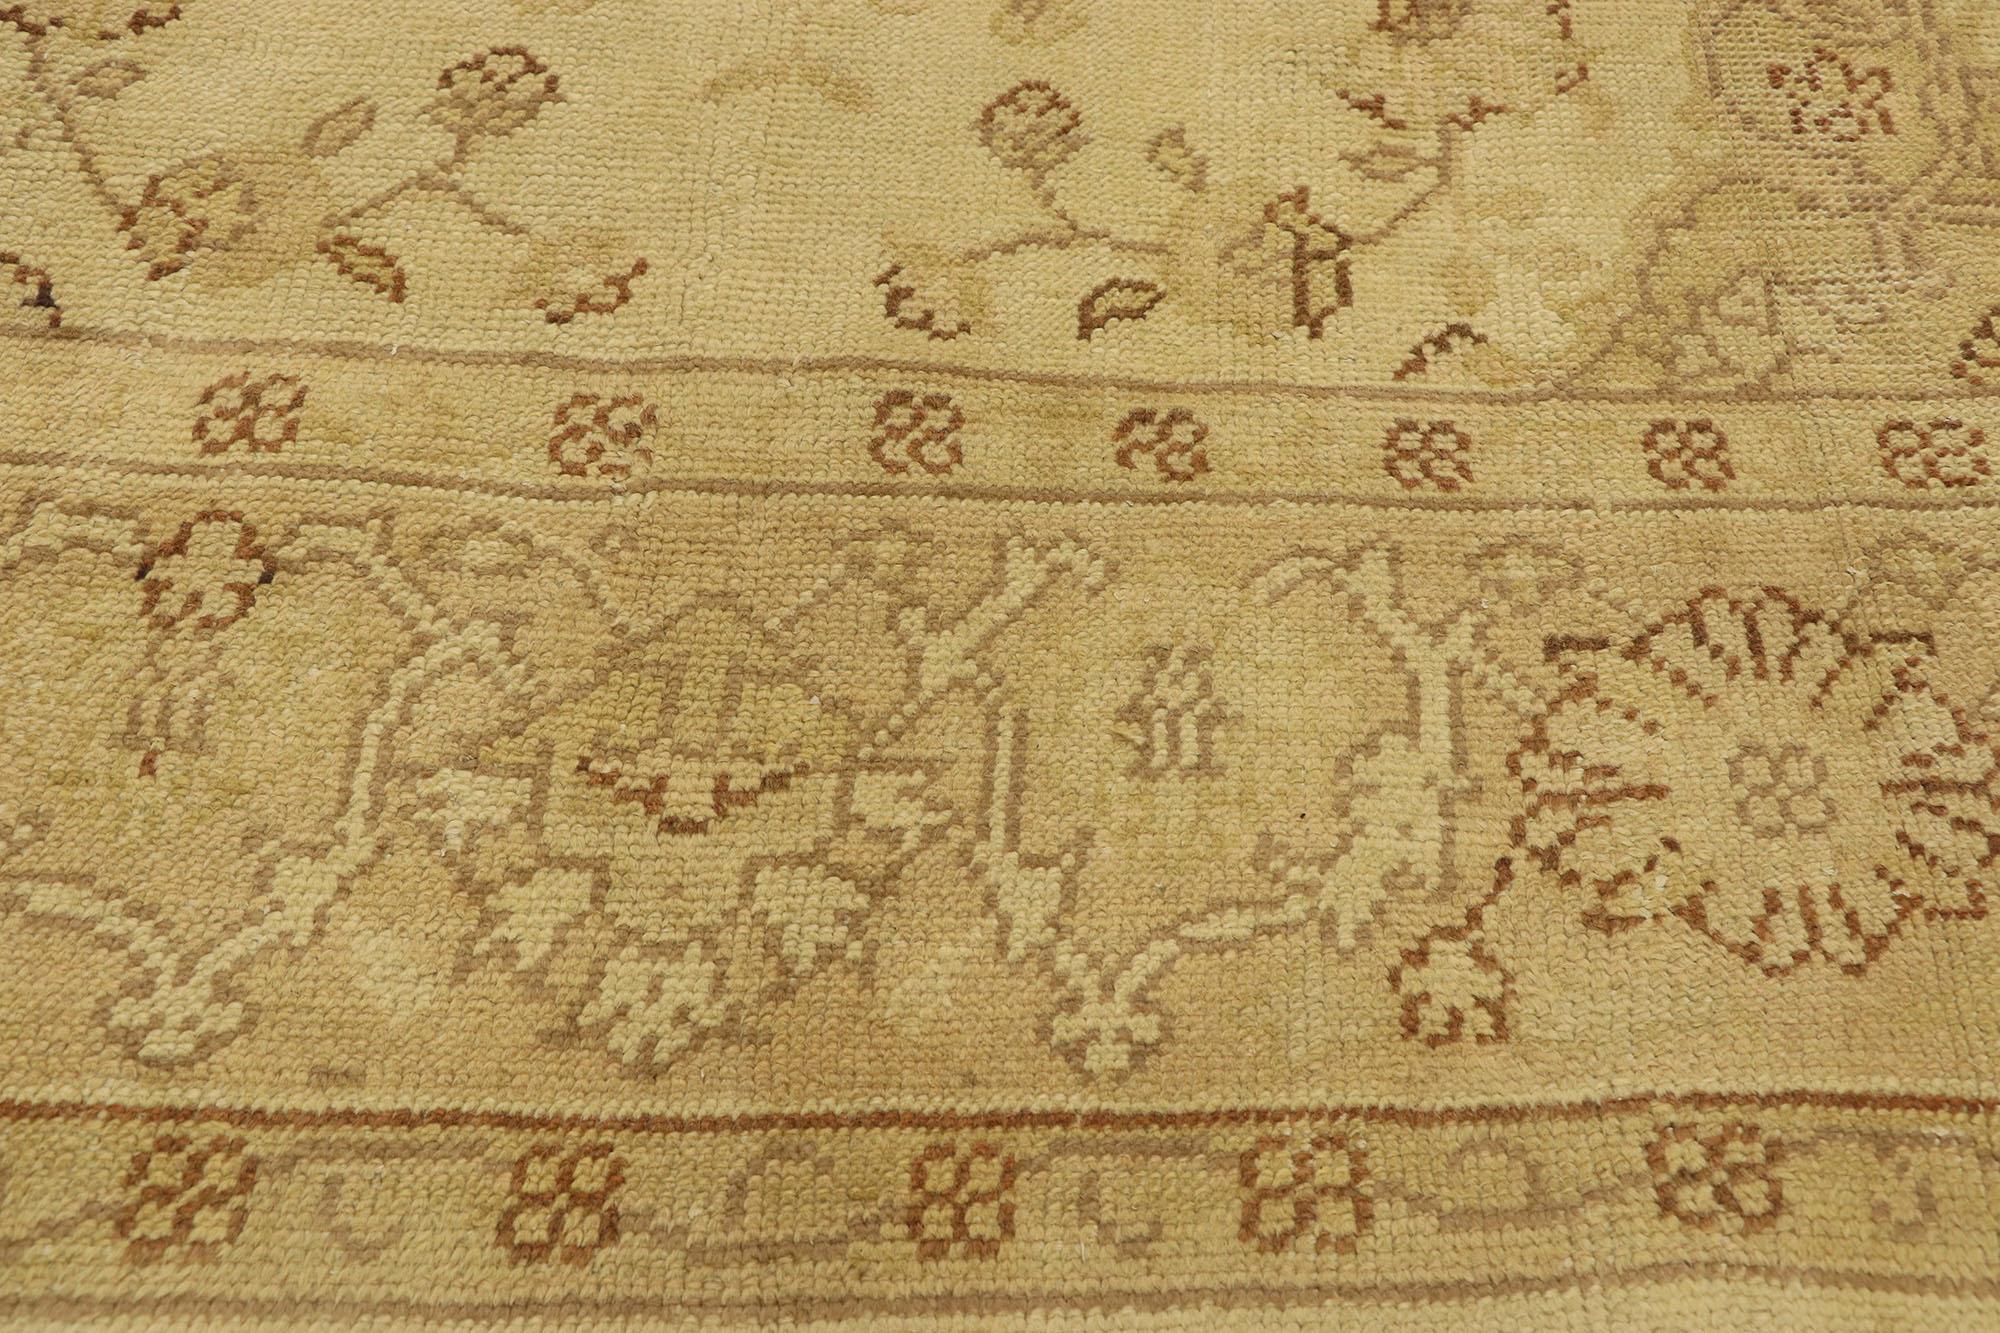 Antique Turkish Oushak Rug with French Country Style and European Cottage Charm In Good Condition For Sale In Dallas, TX